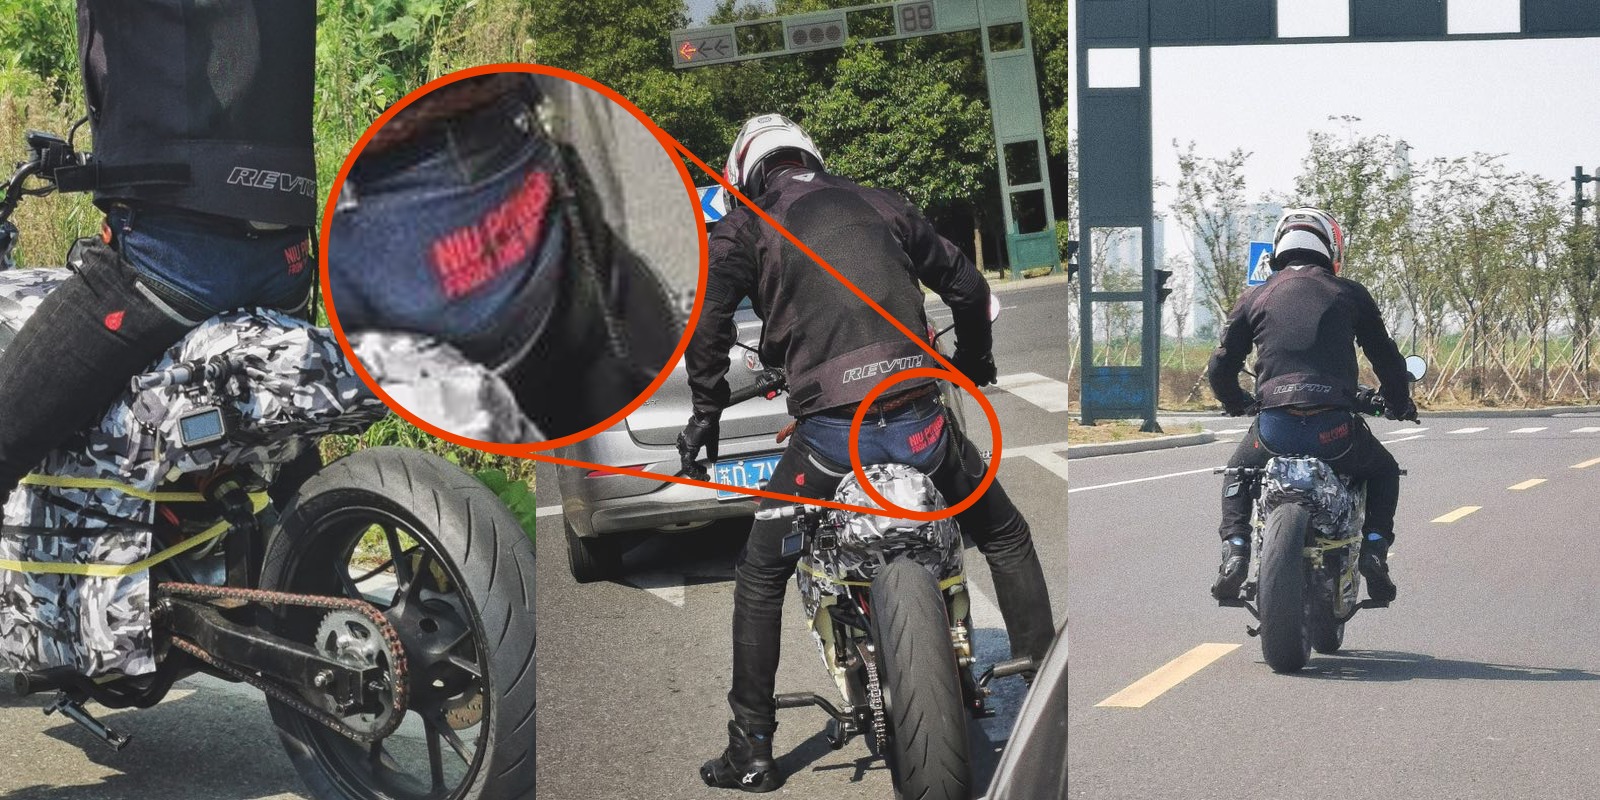 Is a NIU electric motorcycle coming? These spy shots might imply so